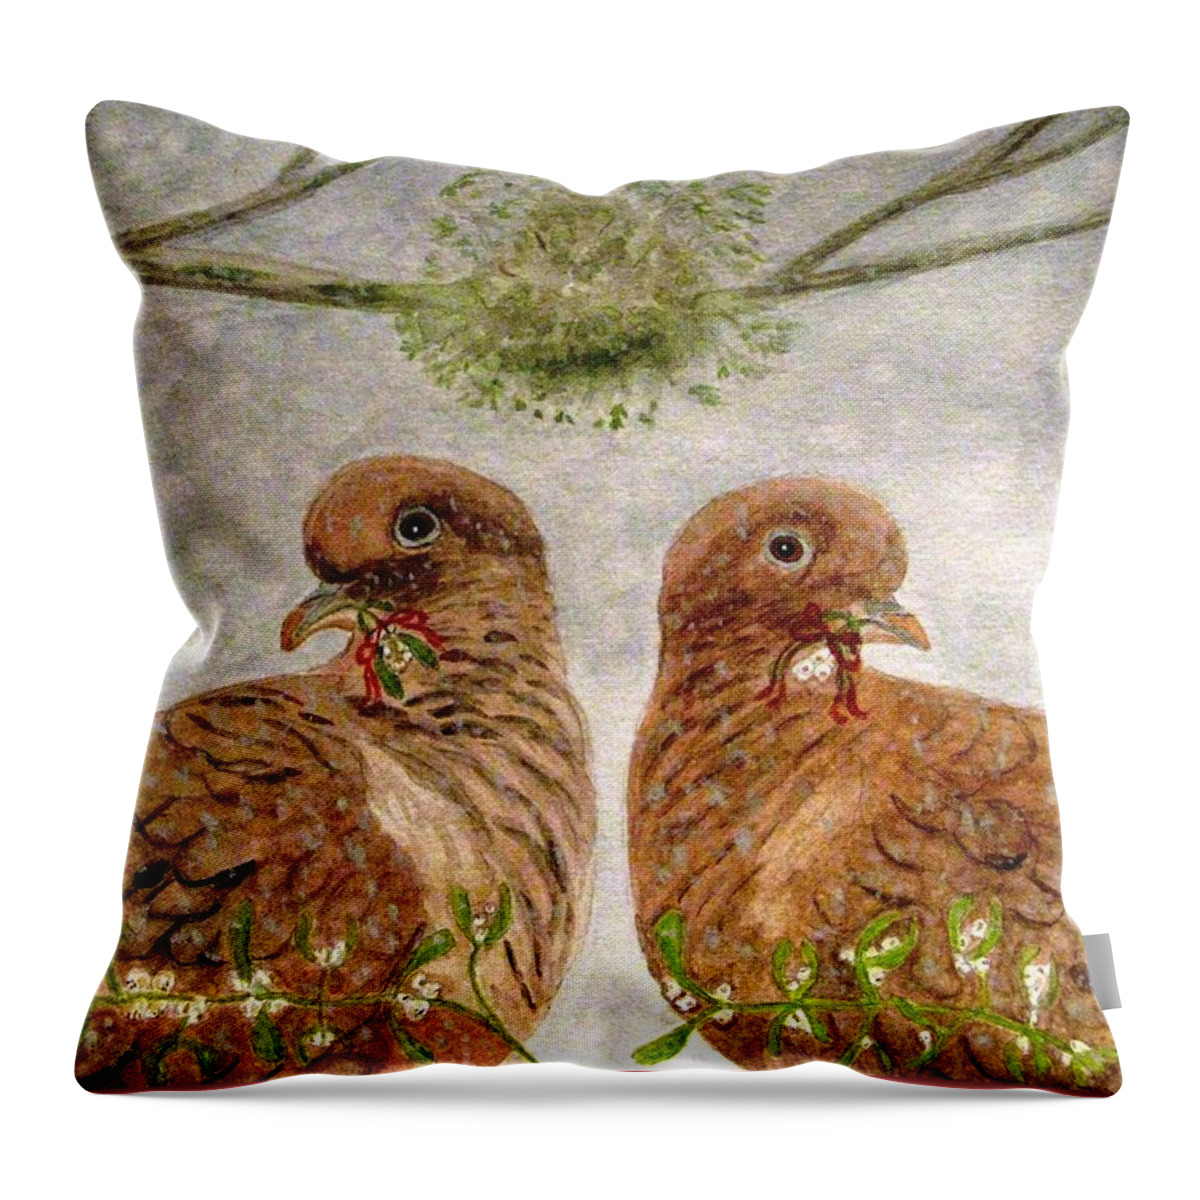 Turtle Doves Throw Pillow featuring the painting Mistletoe Magic by Angela Davies